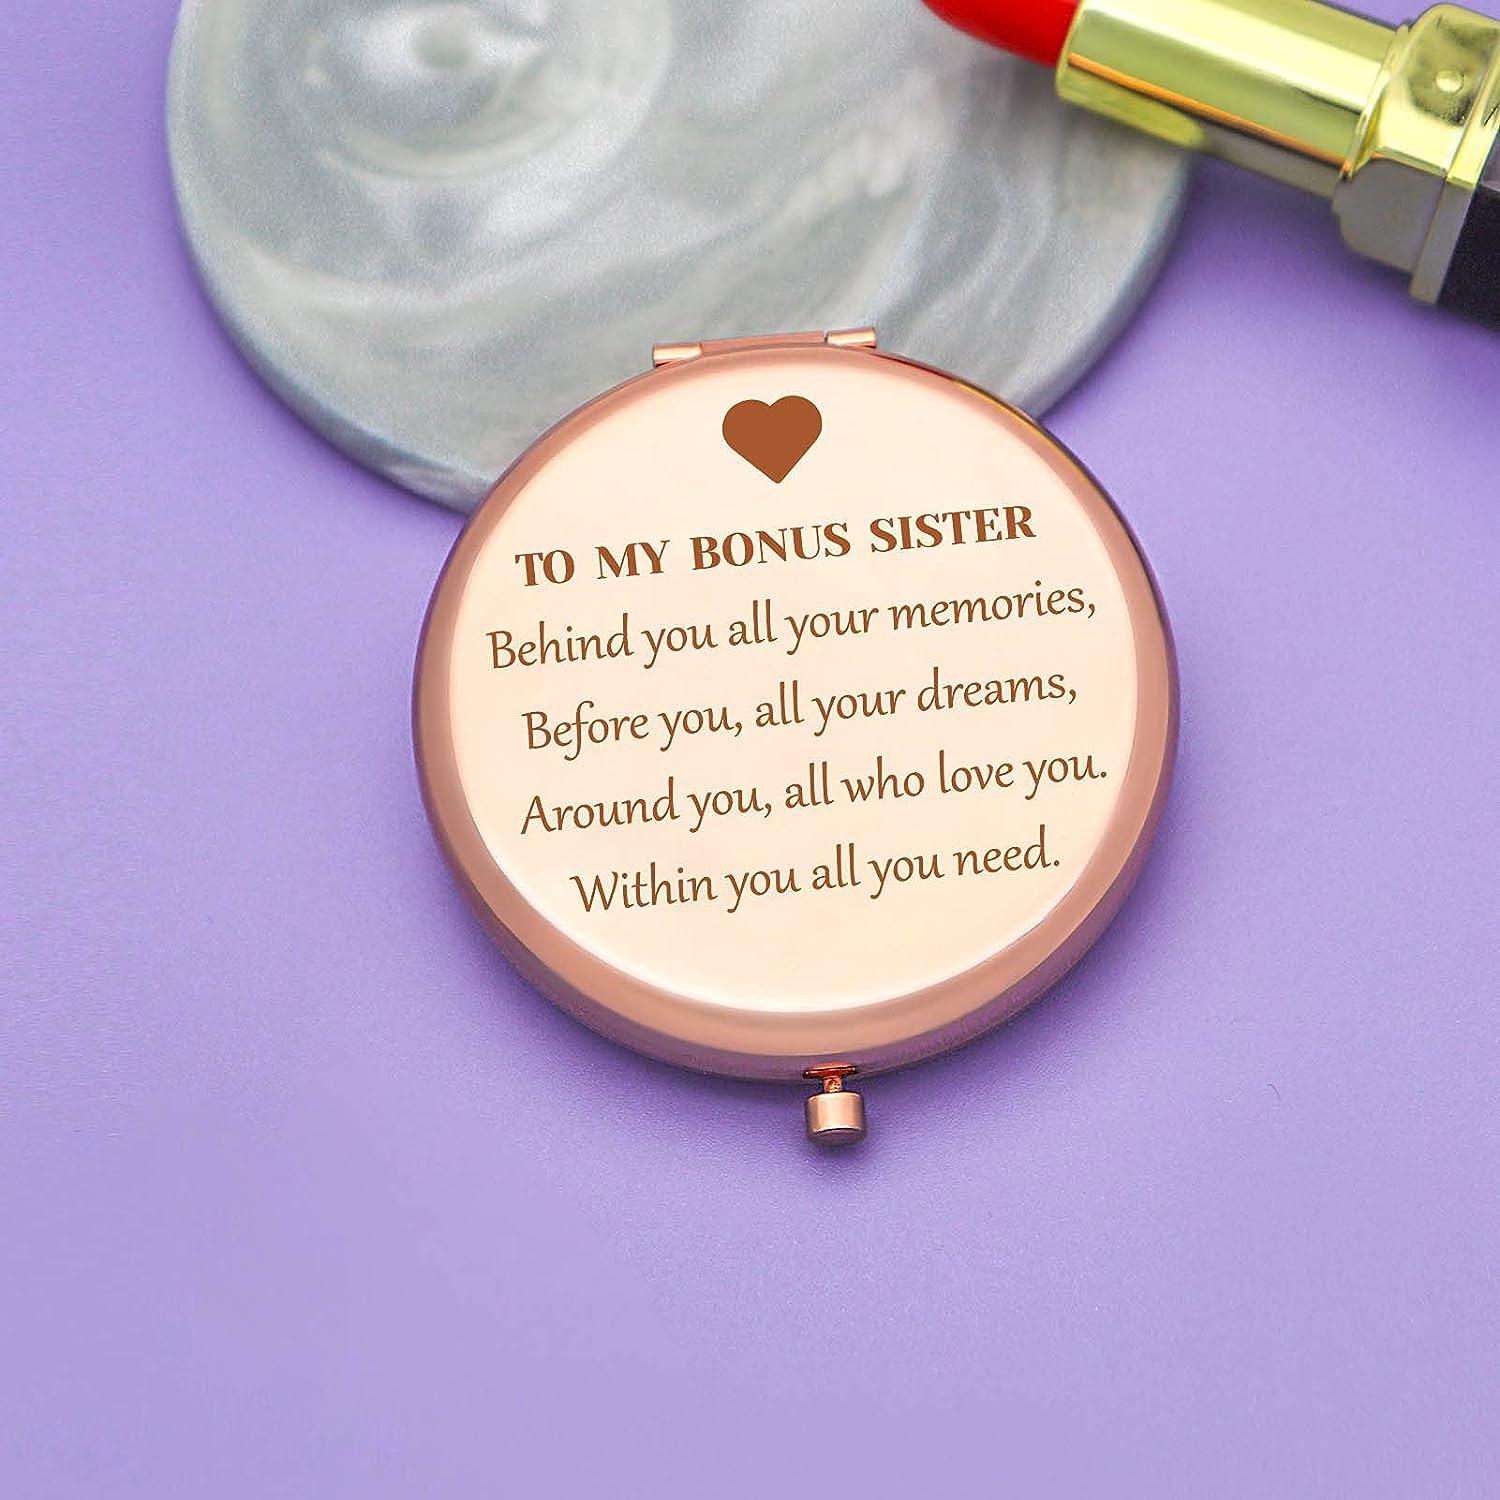 Sister in Law Gifts Compact Makeup Mirror for Bonus Sister Unbiological Sister  Sister in Law Birthday